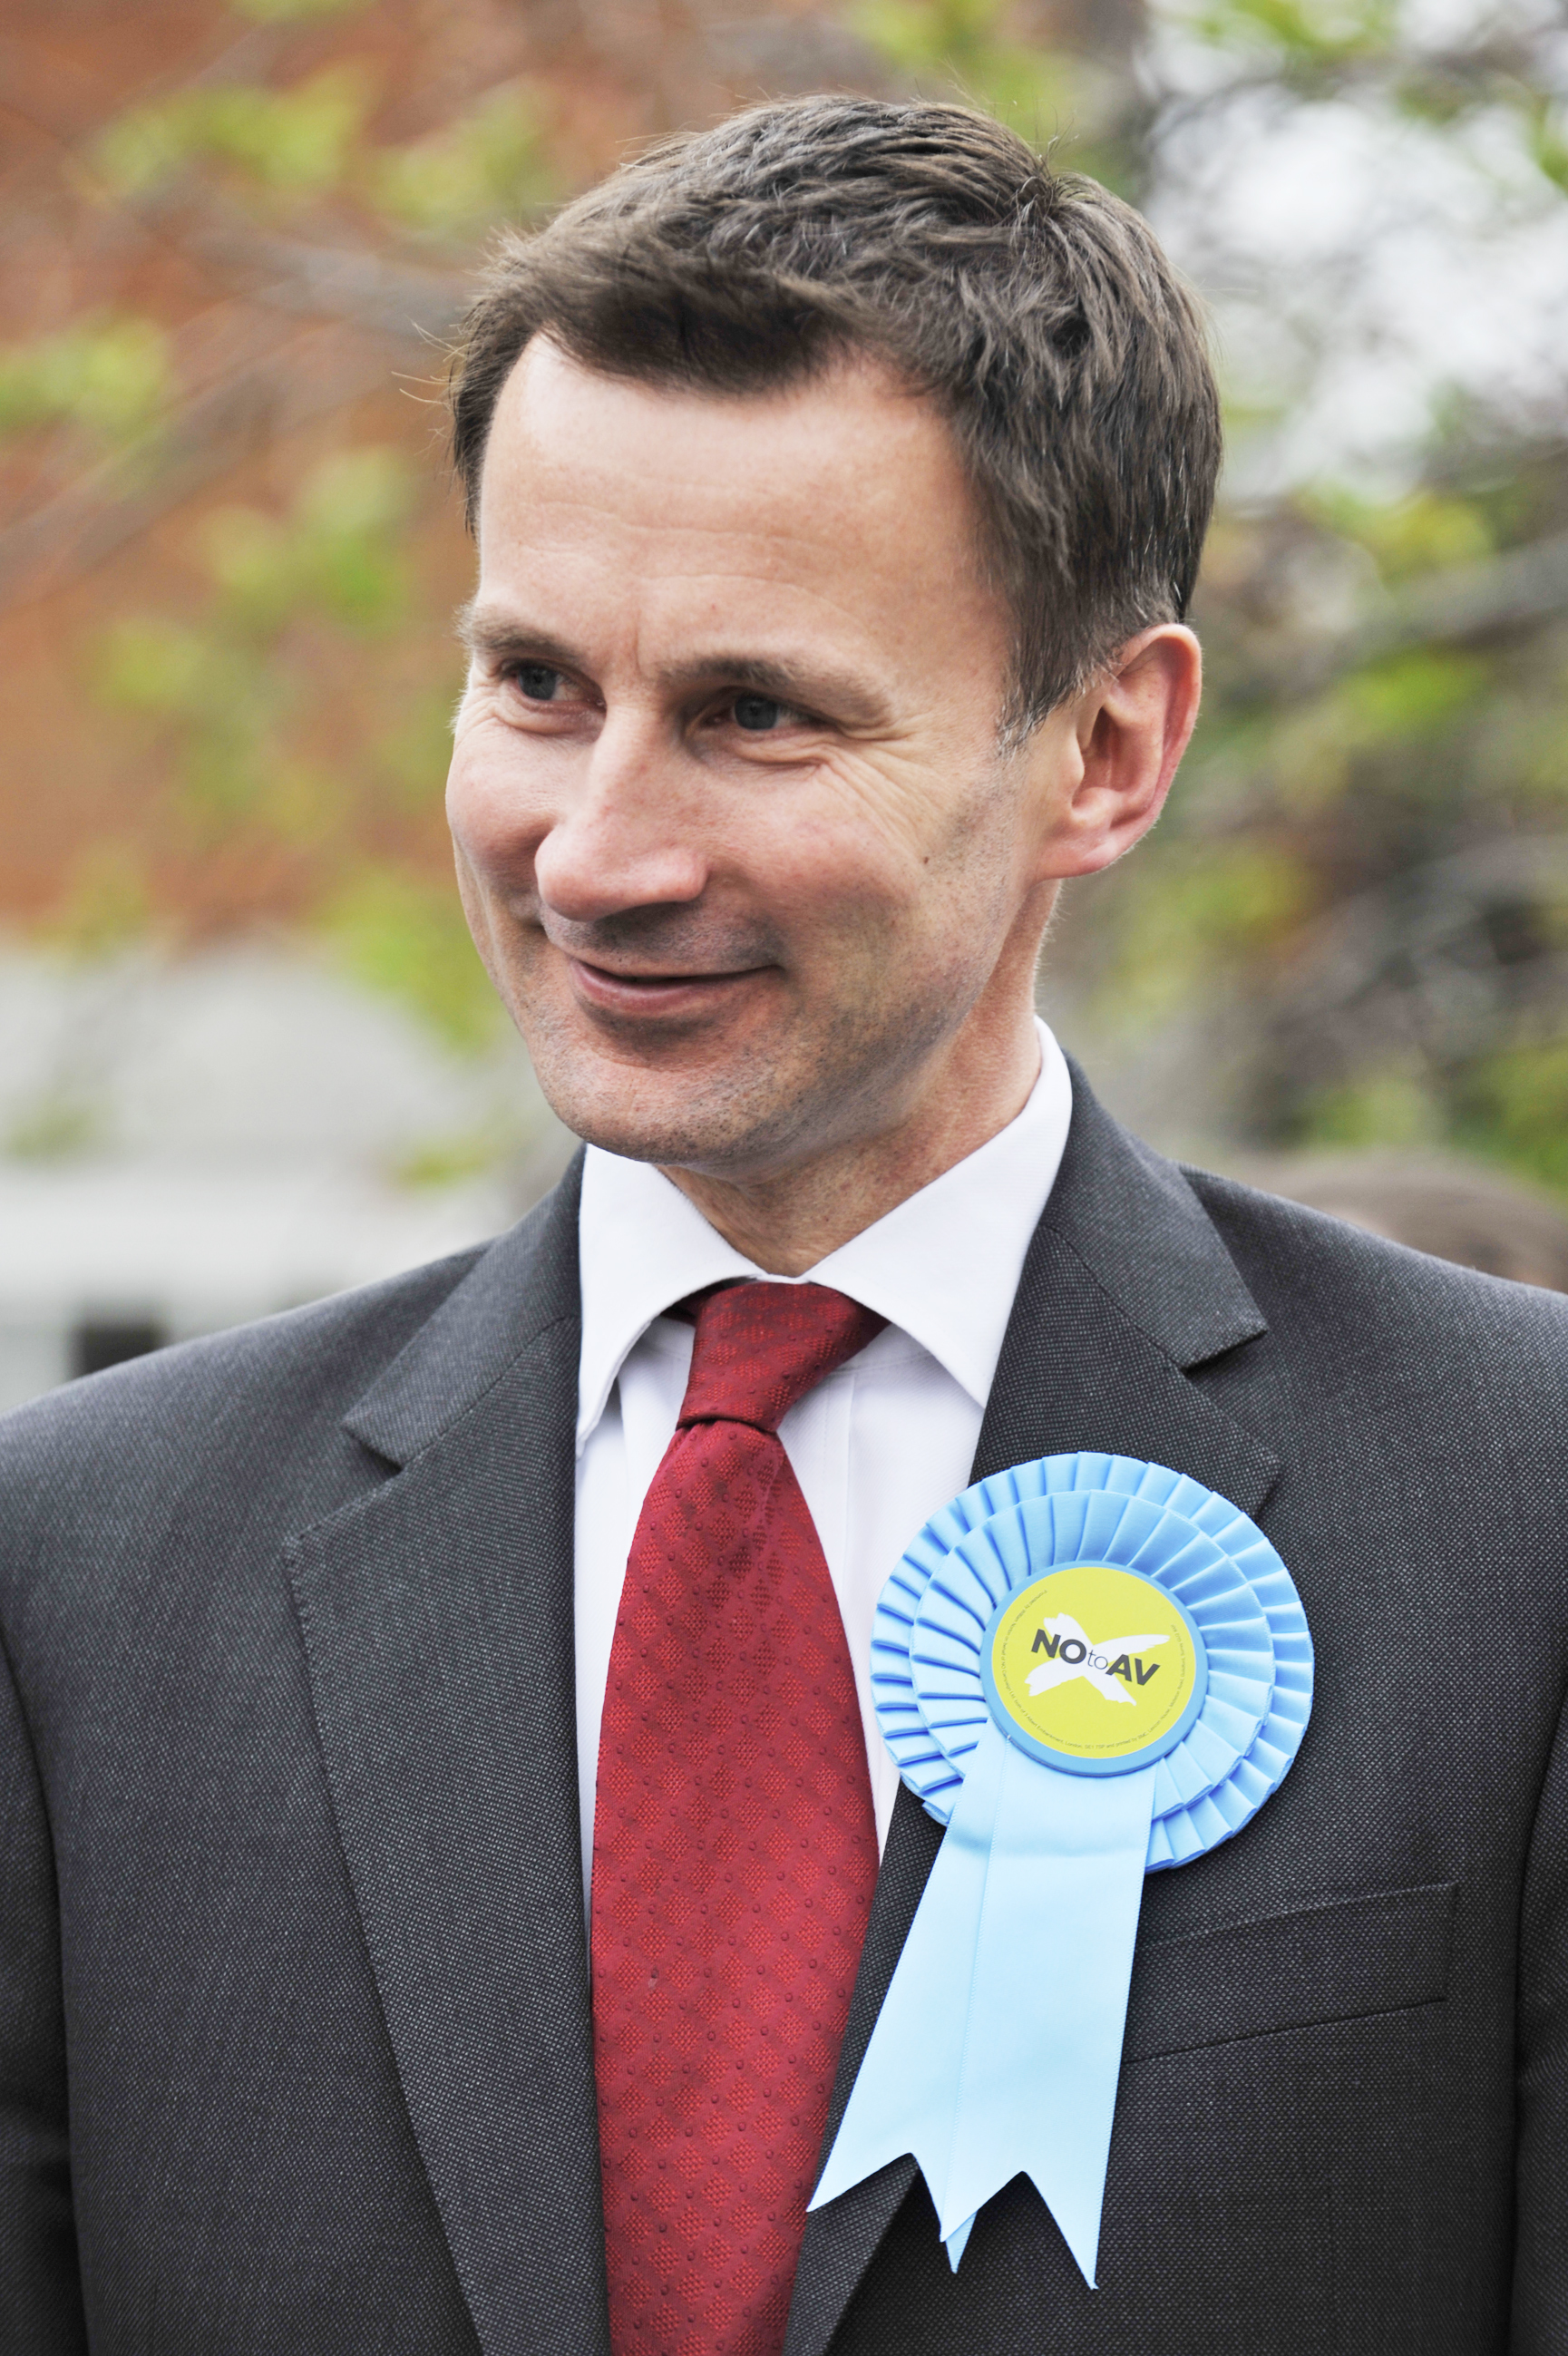 Wanting support - Jeremy Hunt headed to Canvey